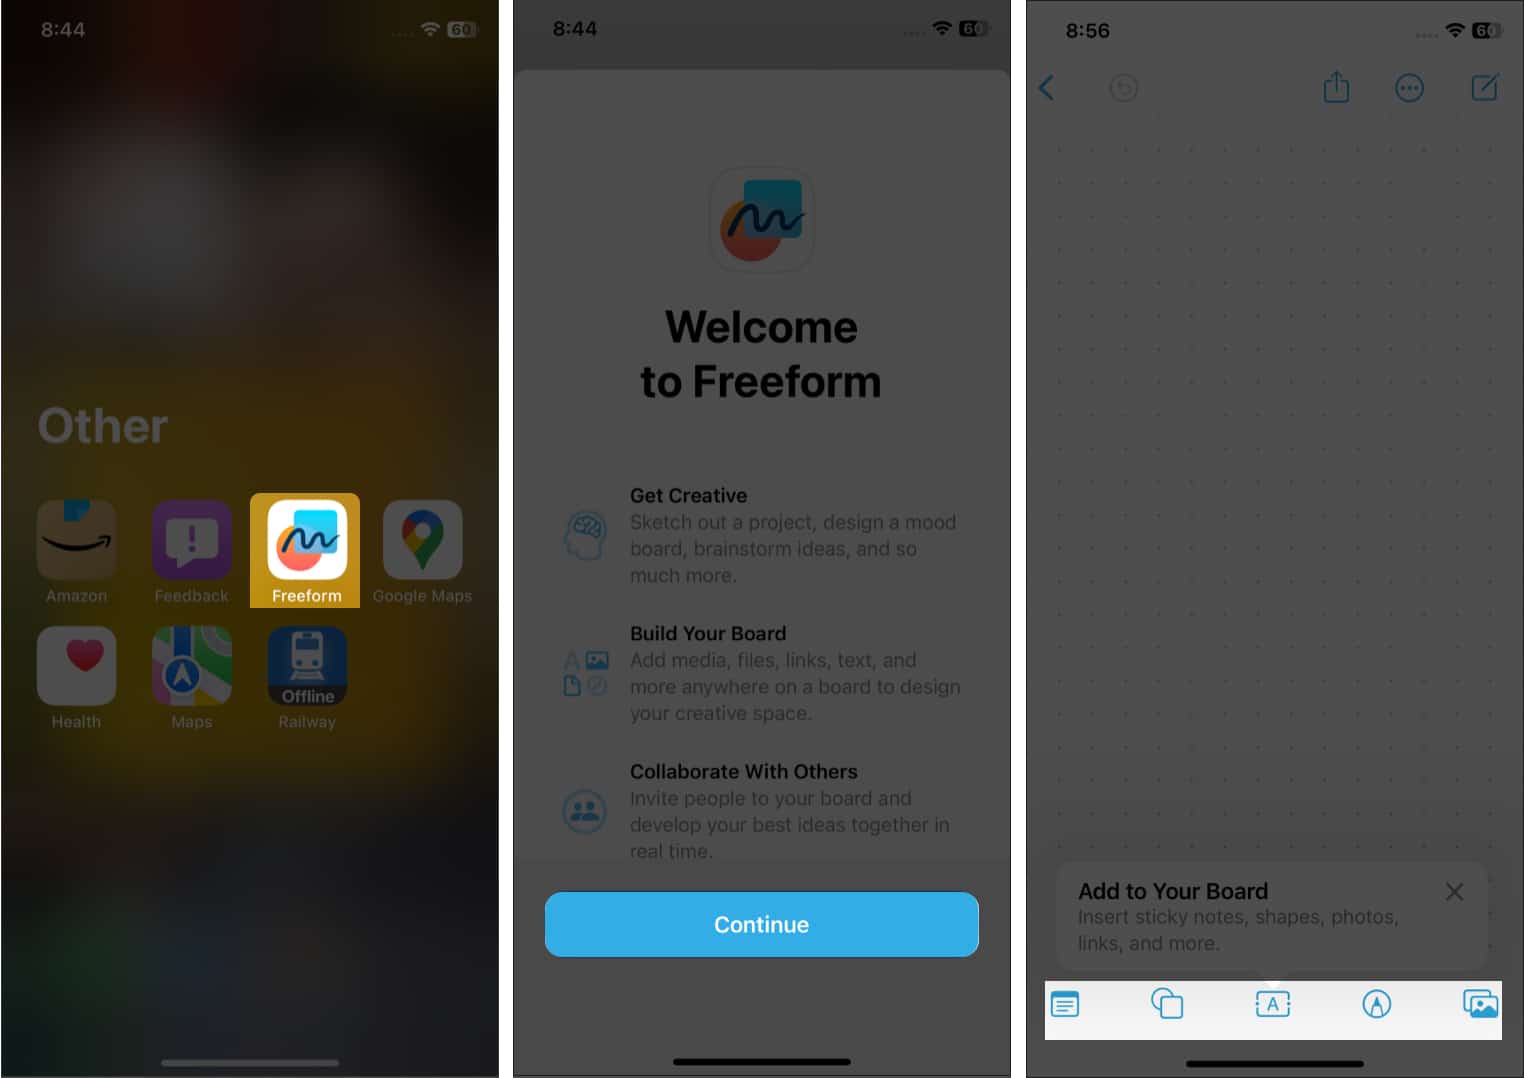 Get started with the Freeform app